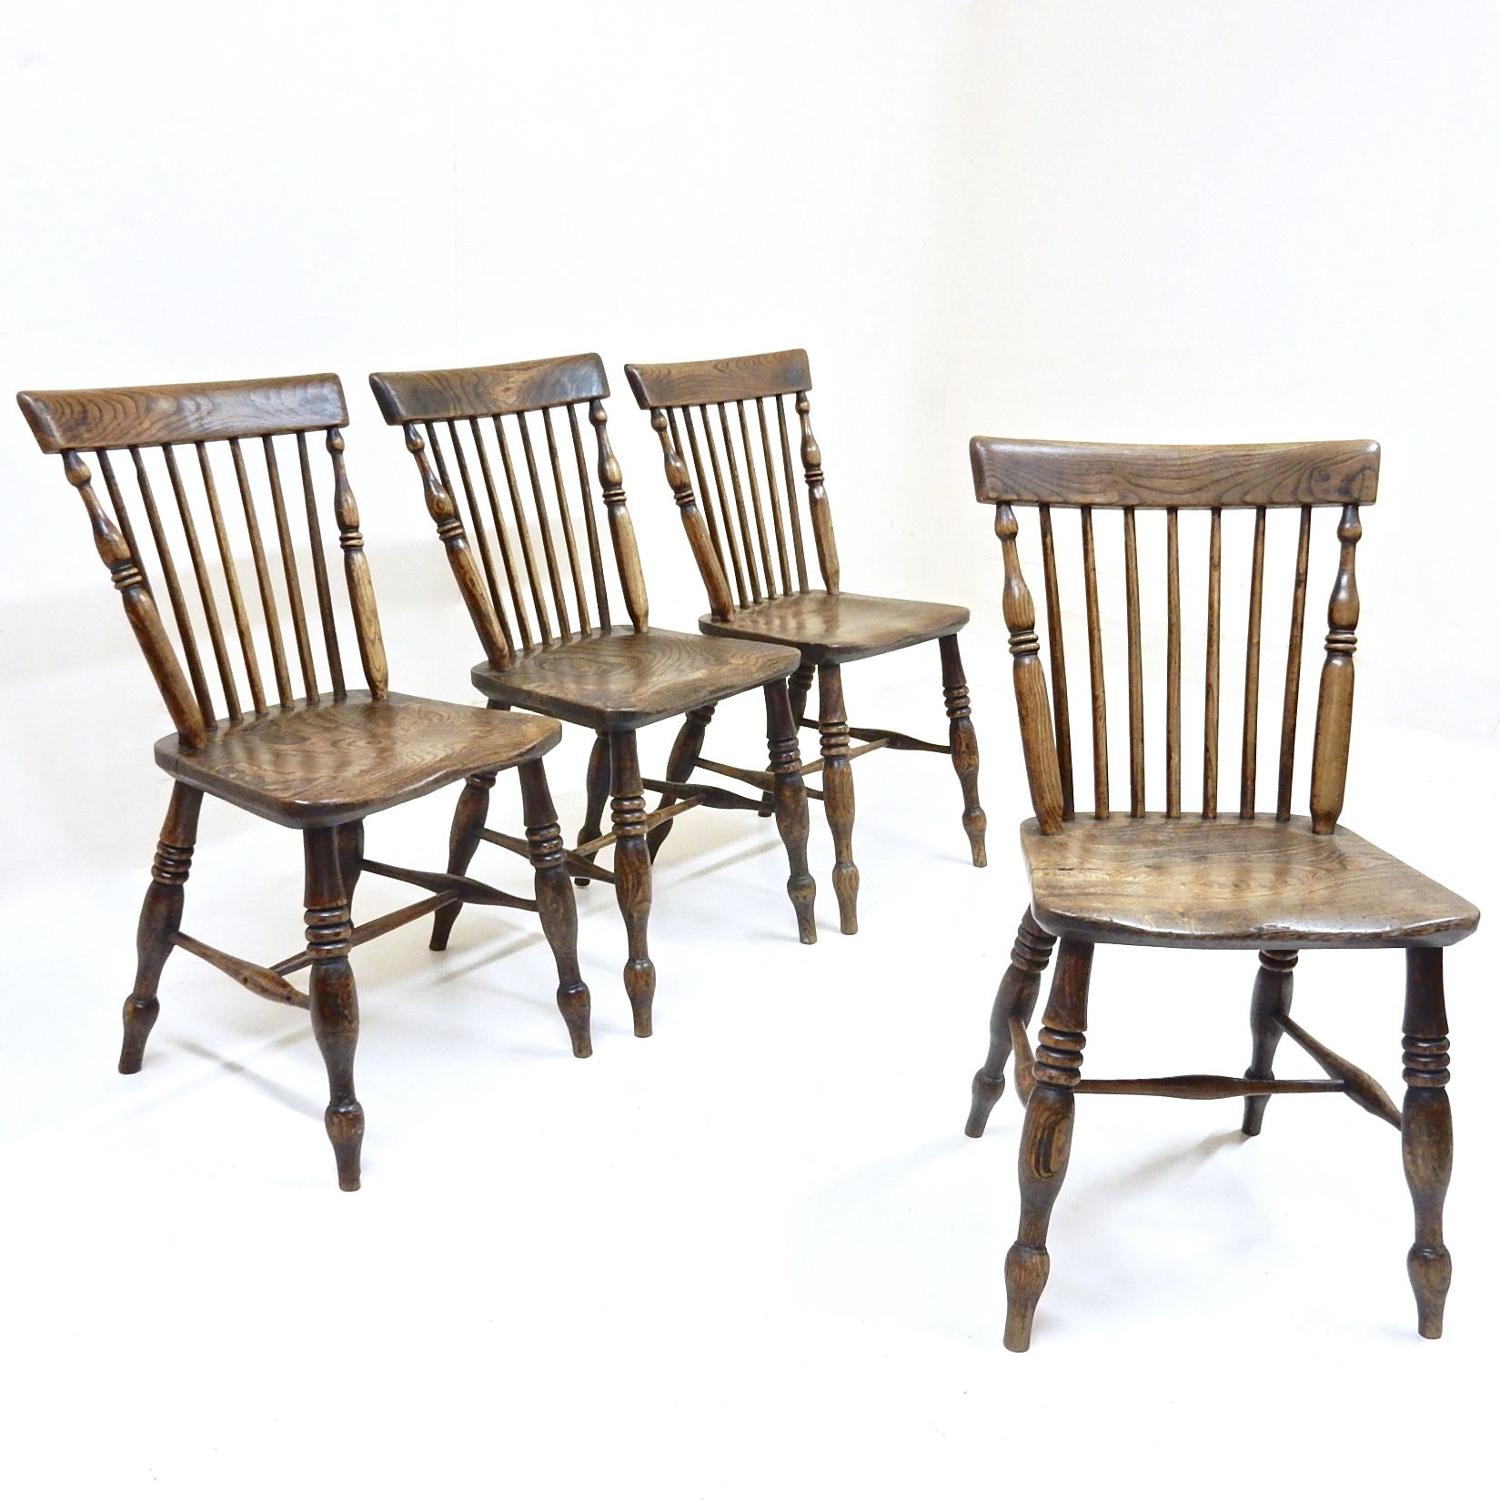 Antique Lincolnshire Chairs